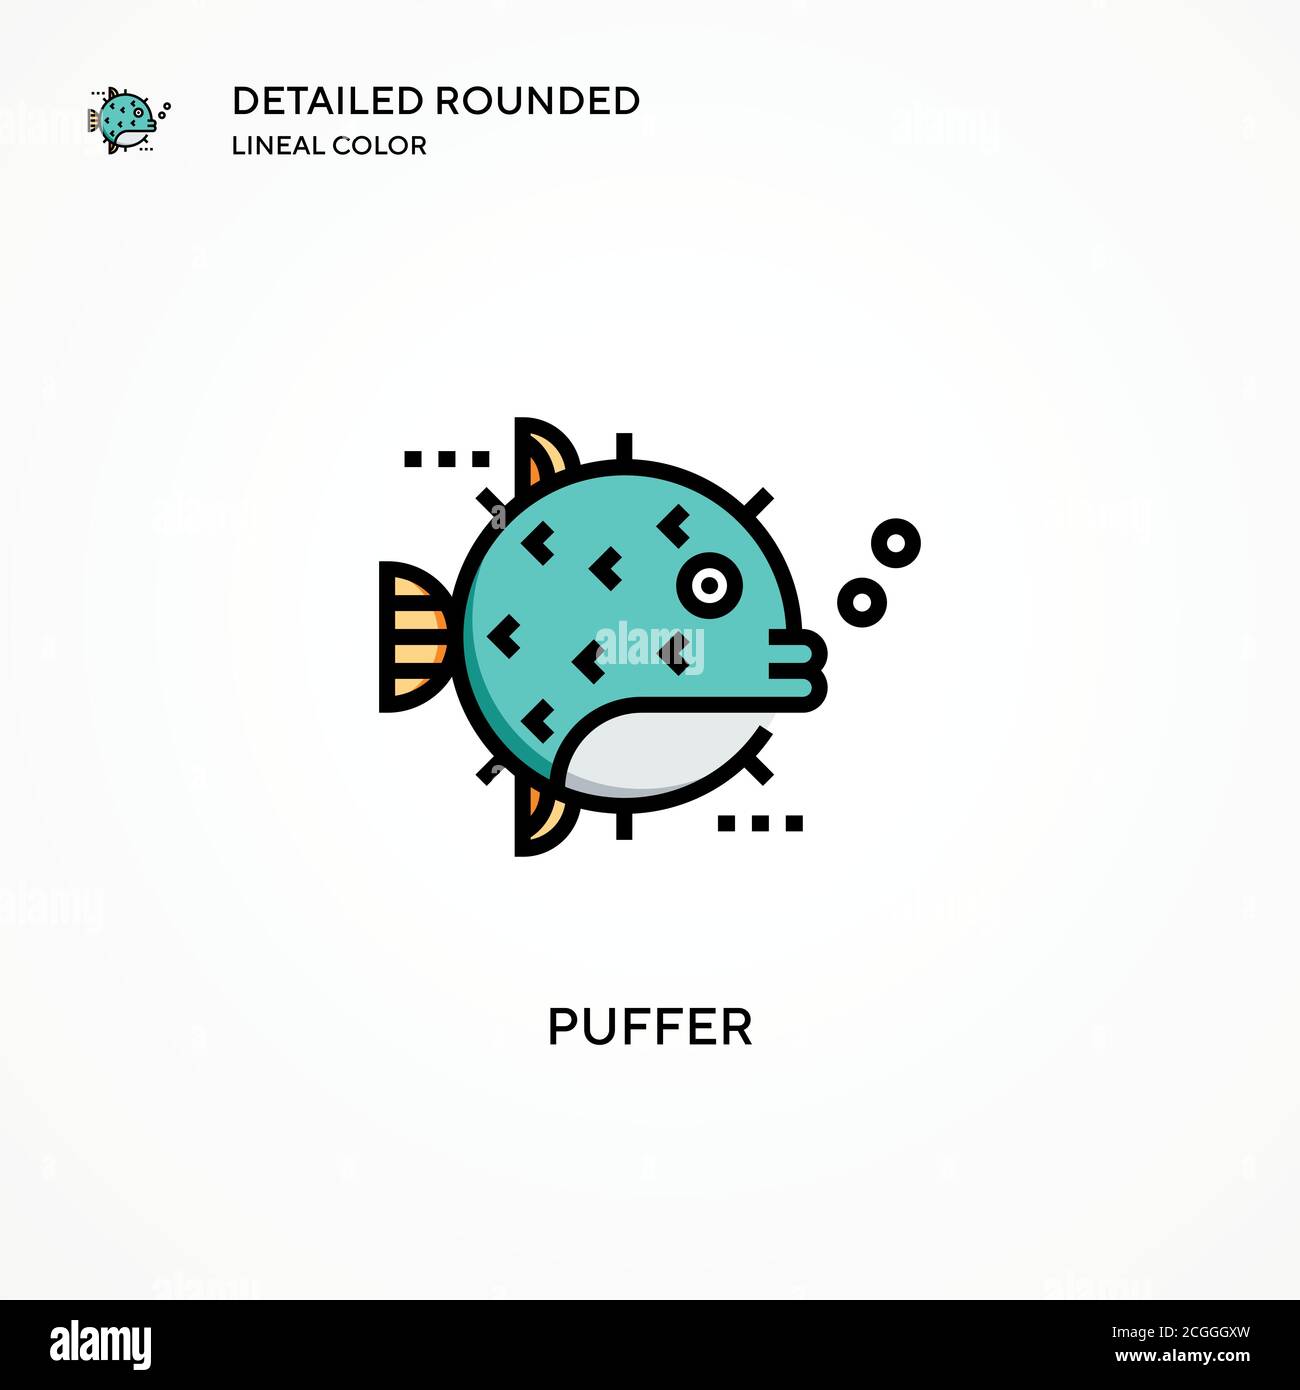 Puffer vector icon. Modern vector illustration concepts. Easy to edit and customize. Stock Vector